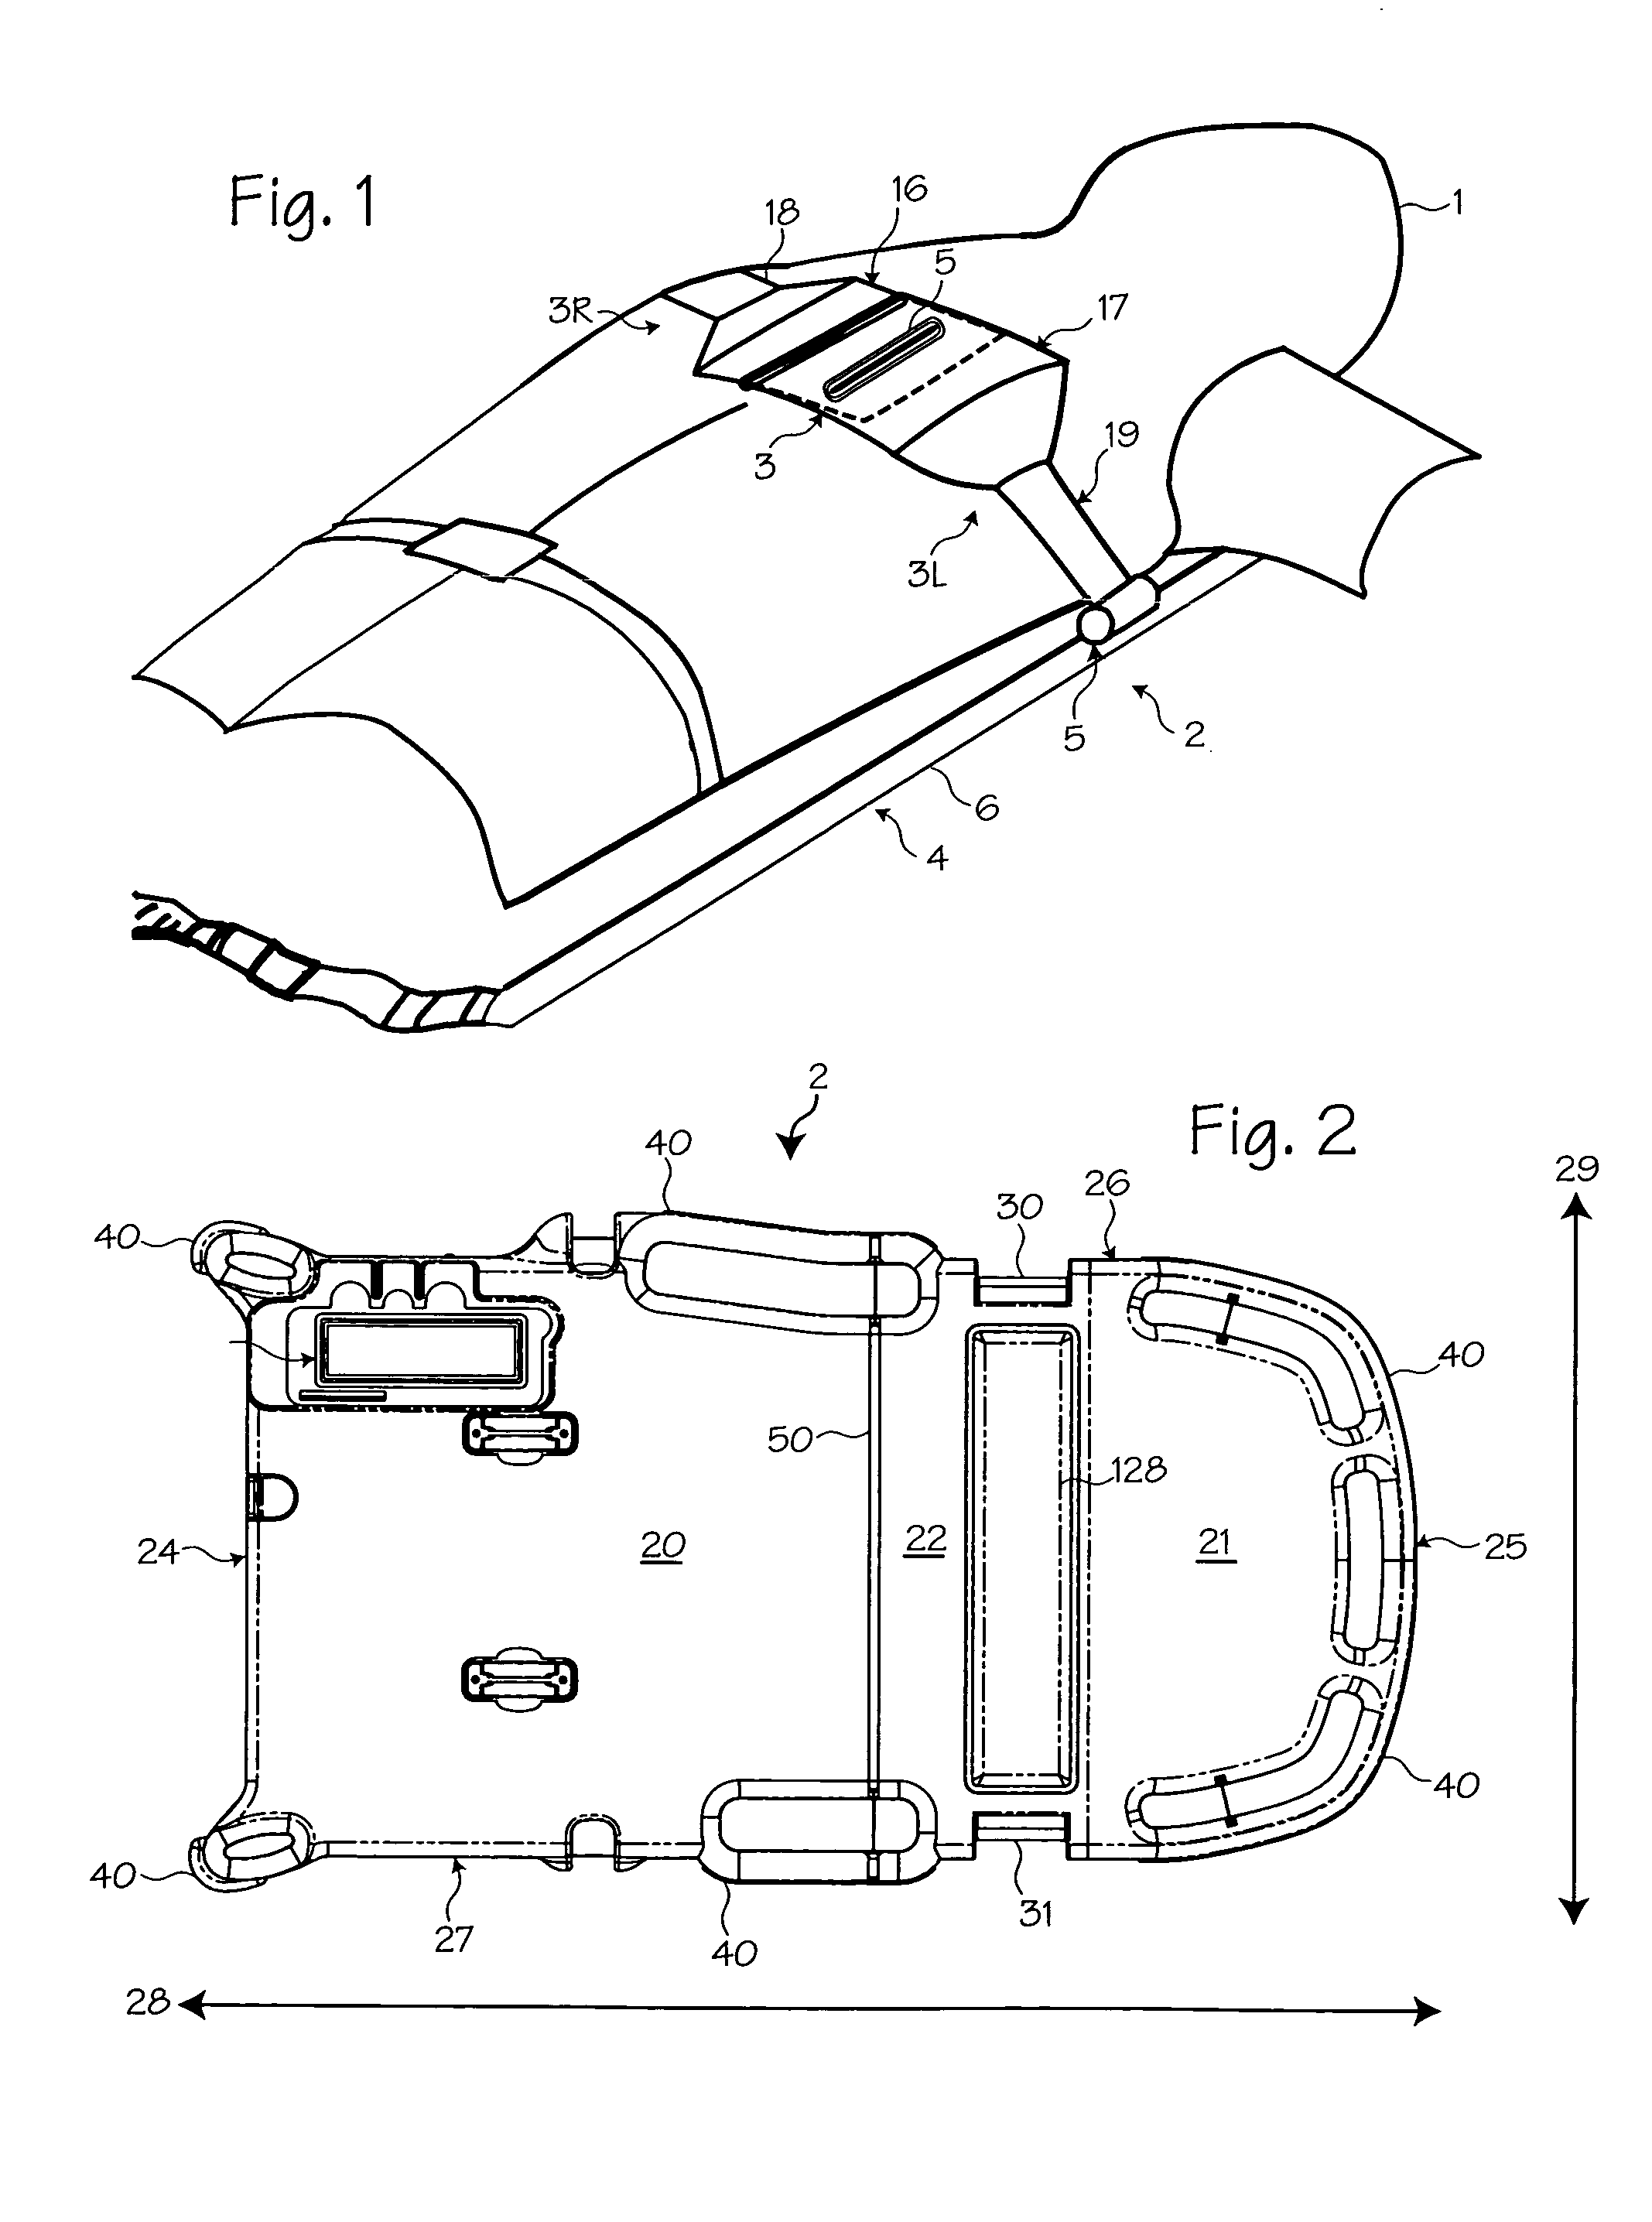 Temperature regulation system for automatic chest compression devices